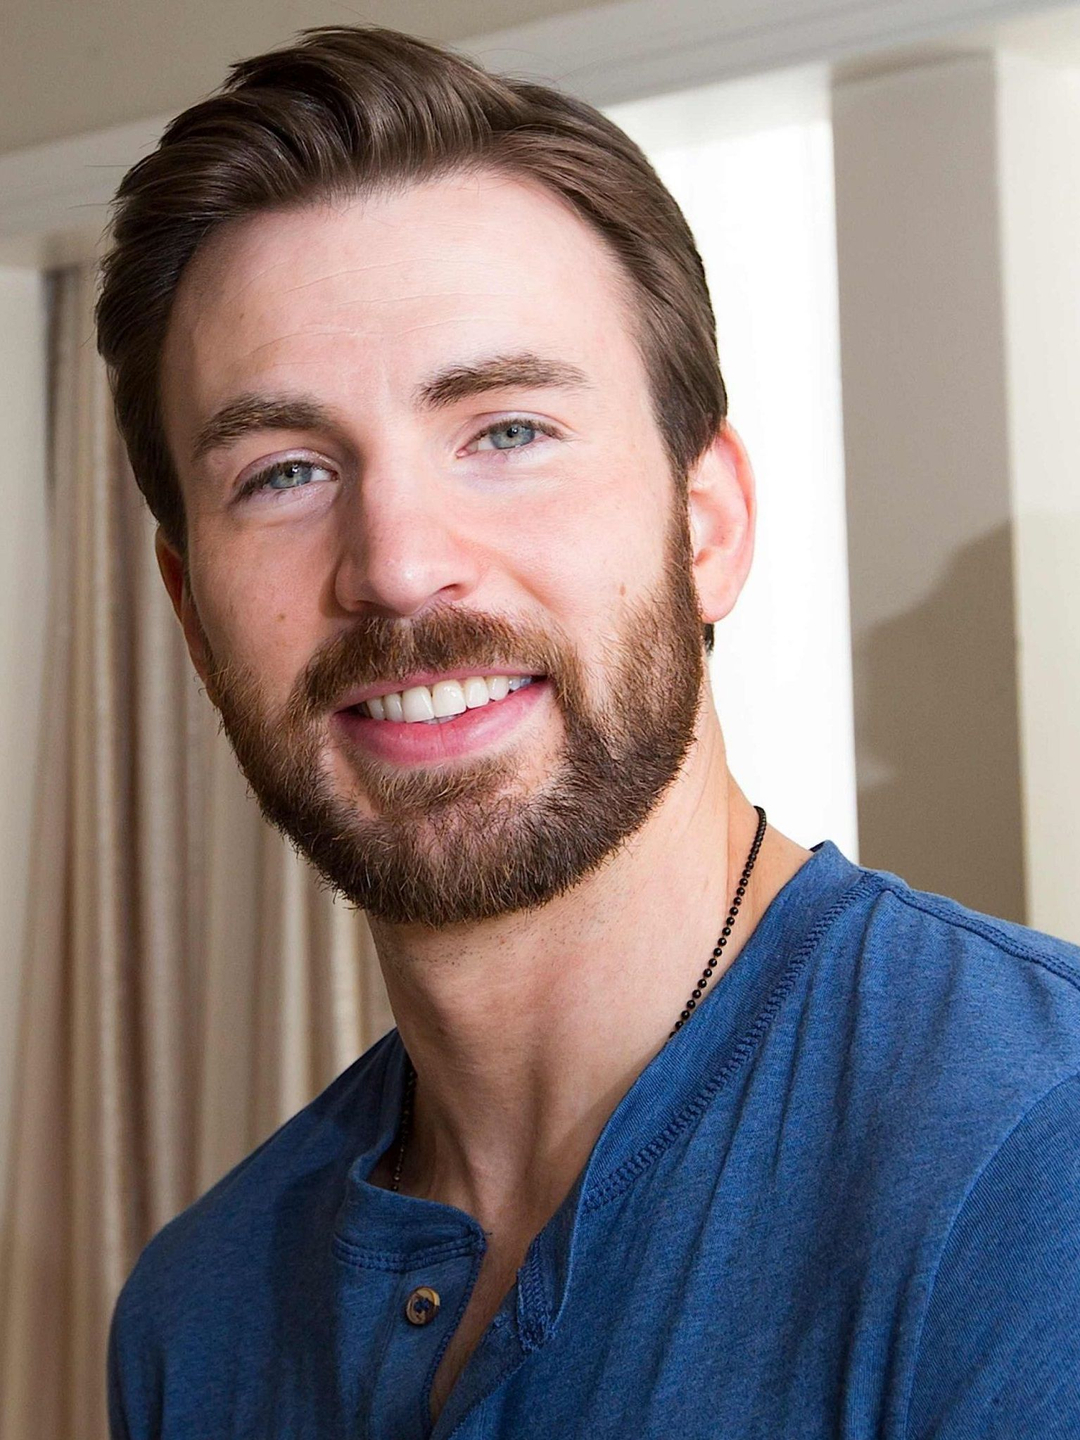 Chris Evans where is he now